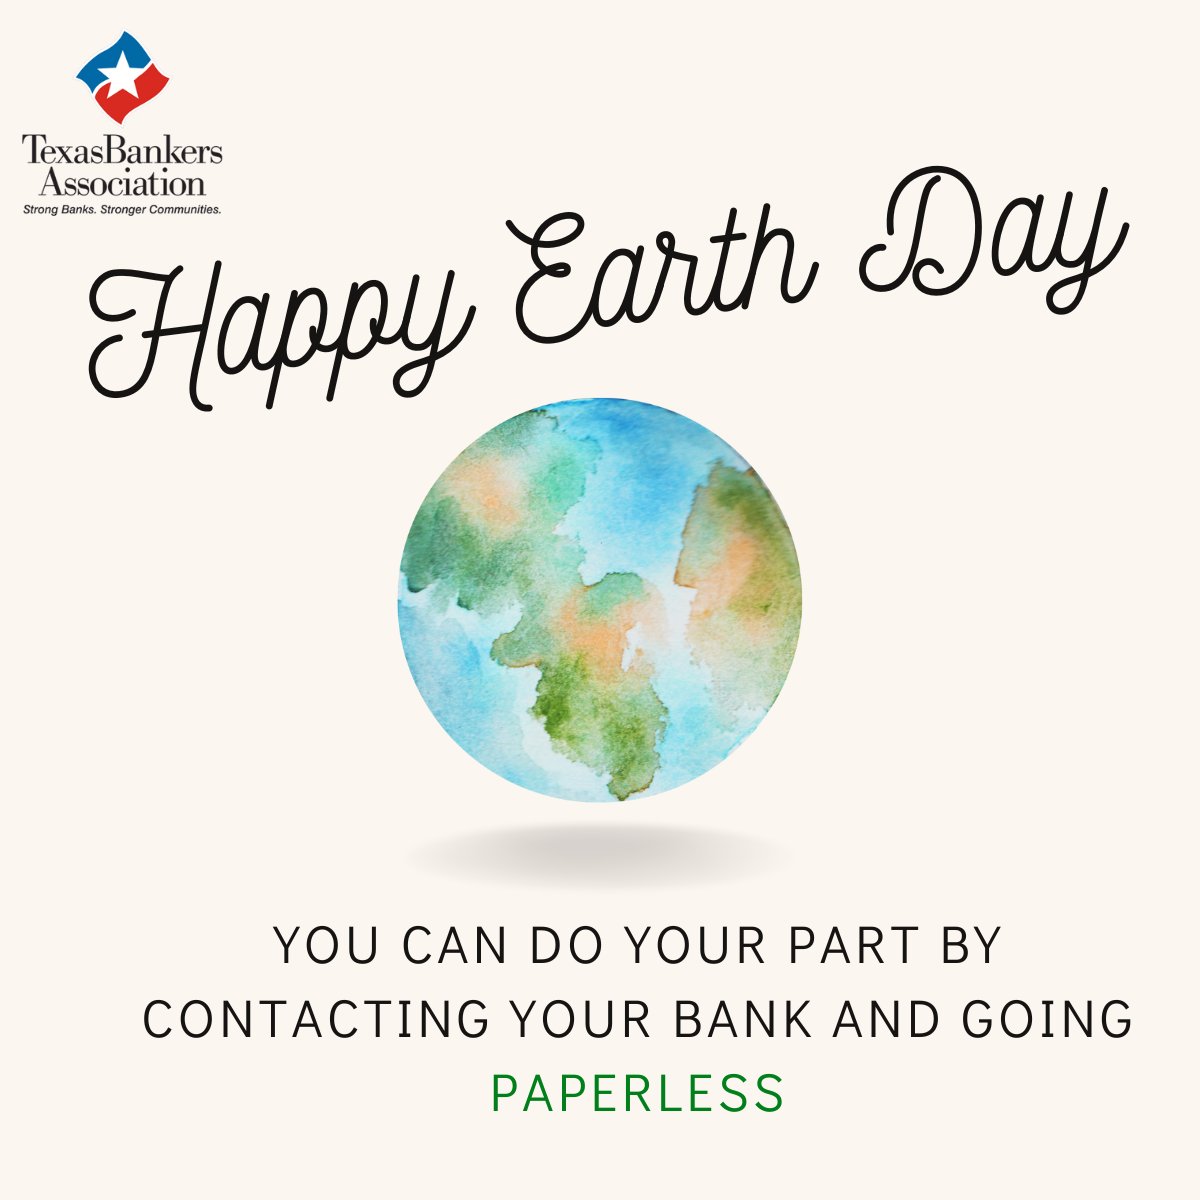 This #EarthDay, let's make a pledge to go paperless! Take the step towards sustainability by contacting your bank and opting for digital account statements. Reduce unnecessary paper waste by subscribing to online billing for other services. 🌱 

#StrongBanks #StrongerCommunities